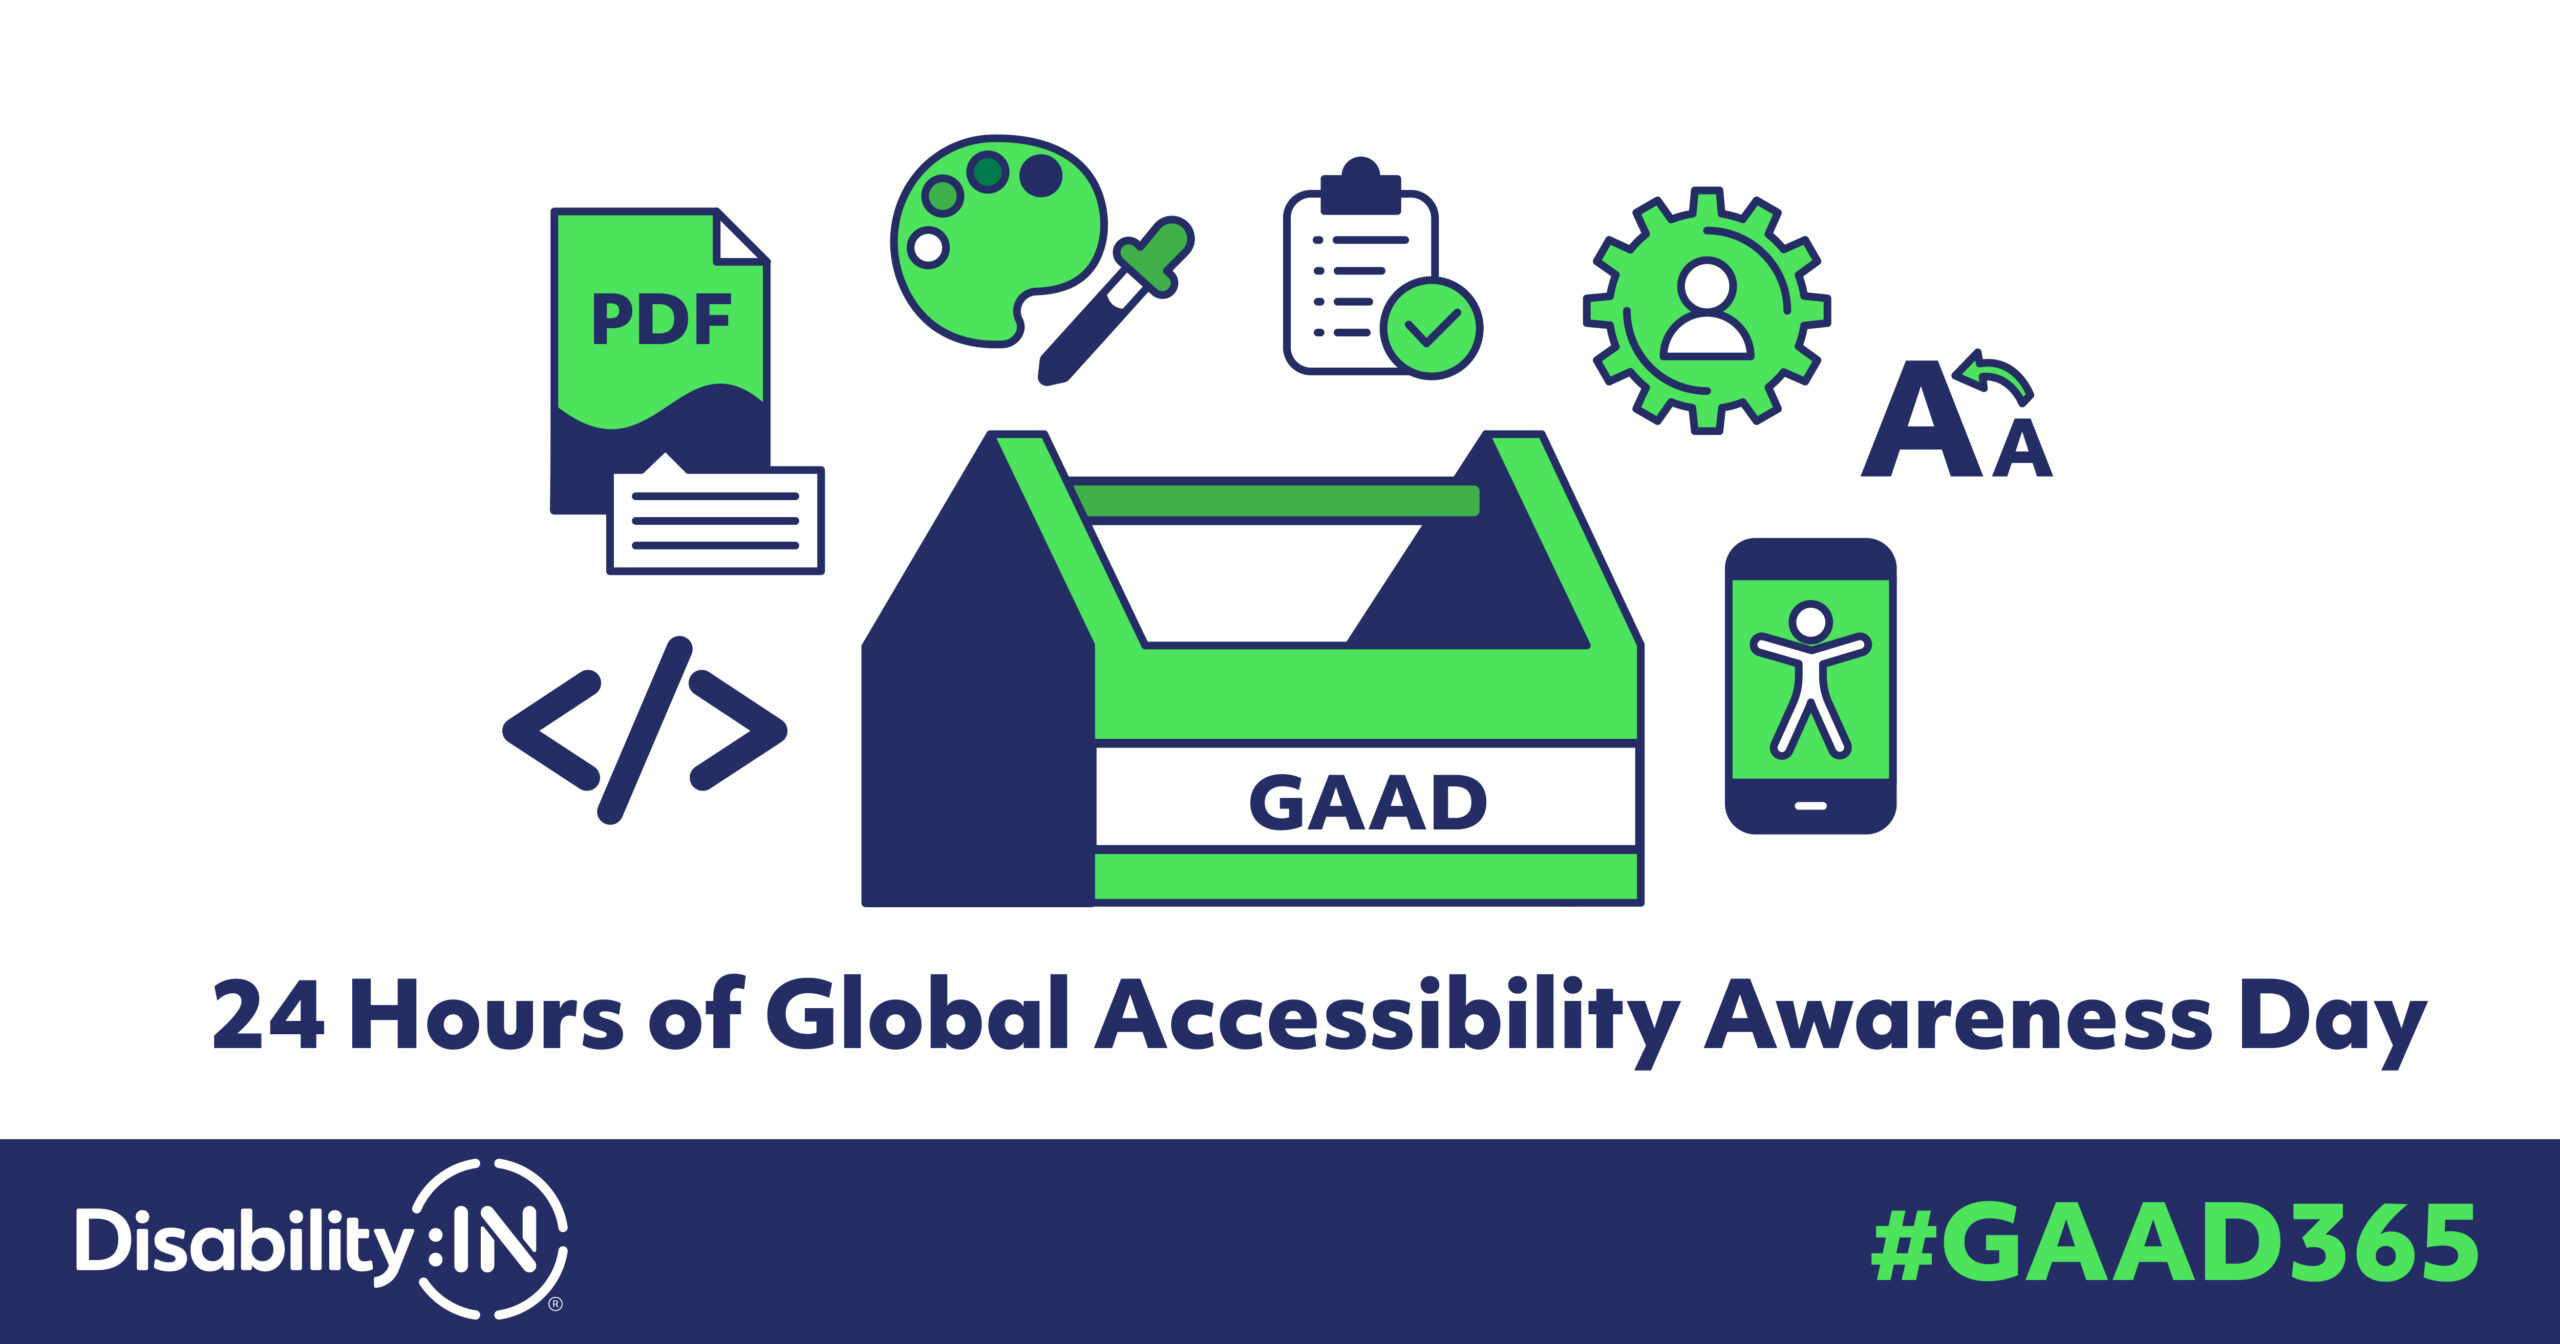 White background with floating blue, green, and white disability icons above a GAAD toolbox above blue text, 24 Hours of Global Accessibility Awareness Day. On the bottom is a blue banner with a white Disability:IN logo and green text, hashtag GAAD365.